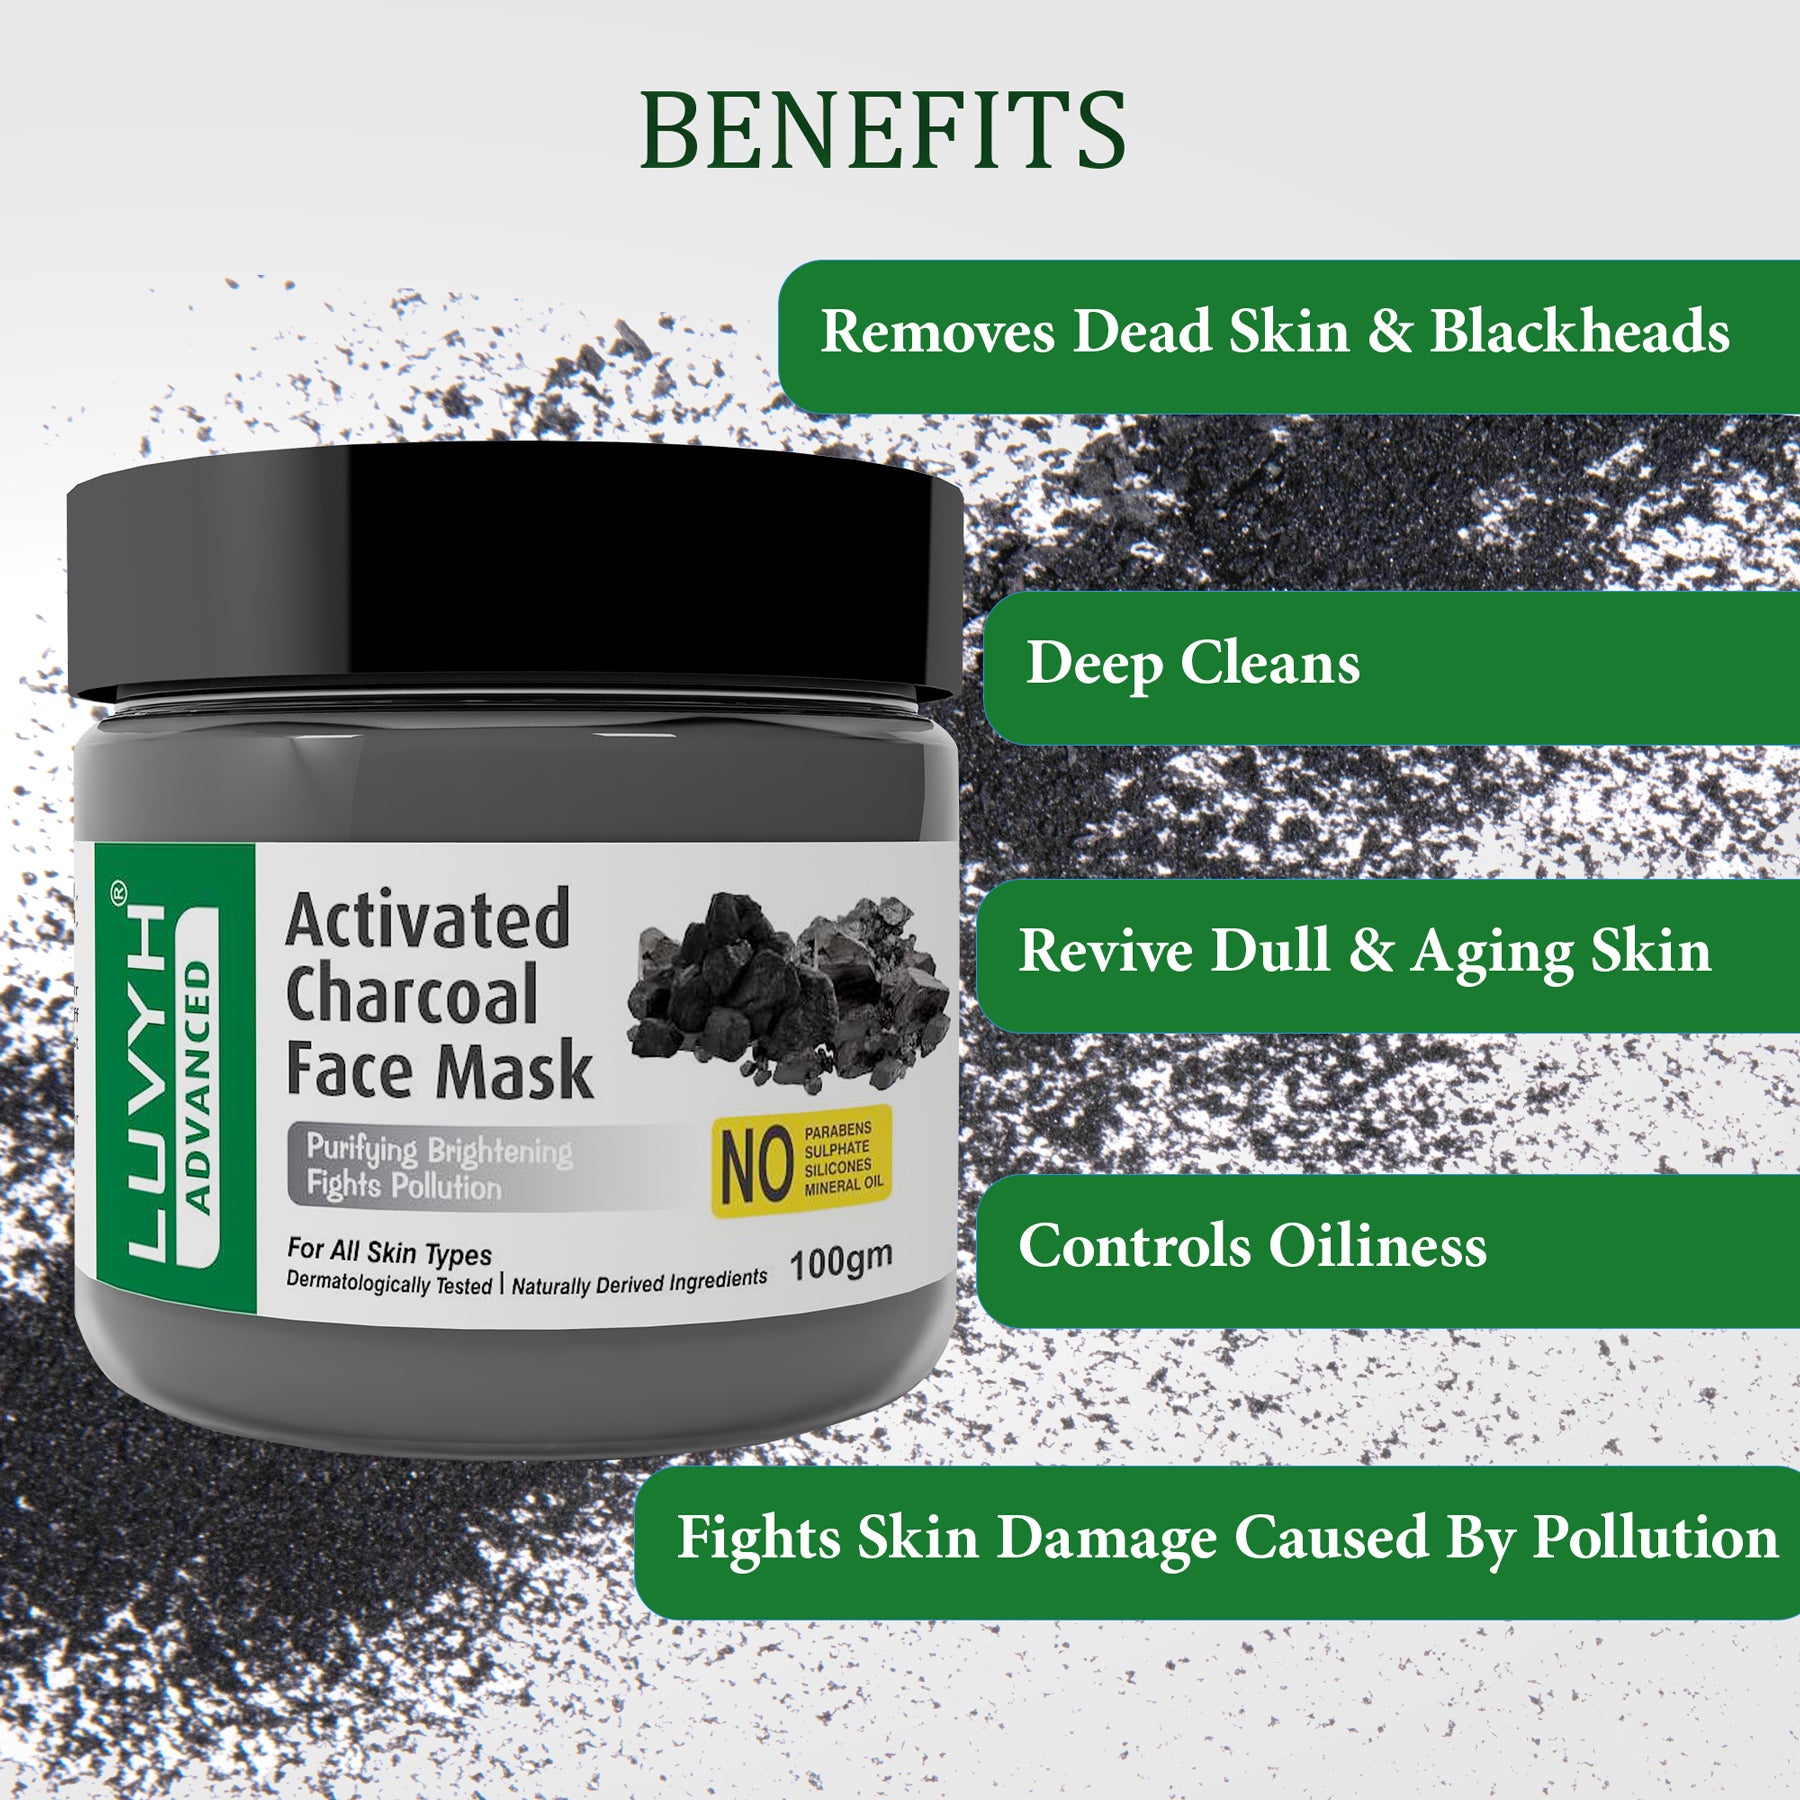 Benefits of Activated Charcoal Face Mask